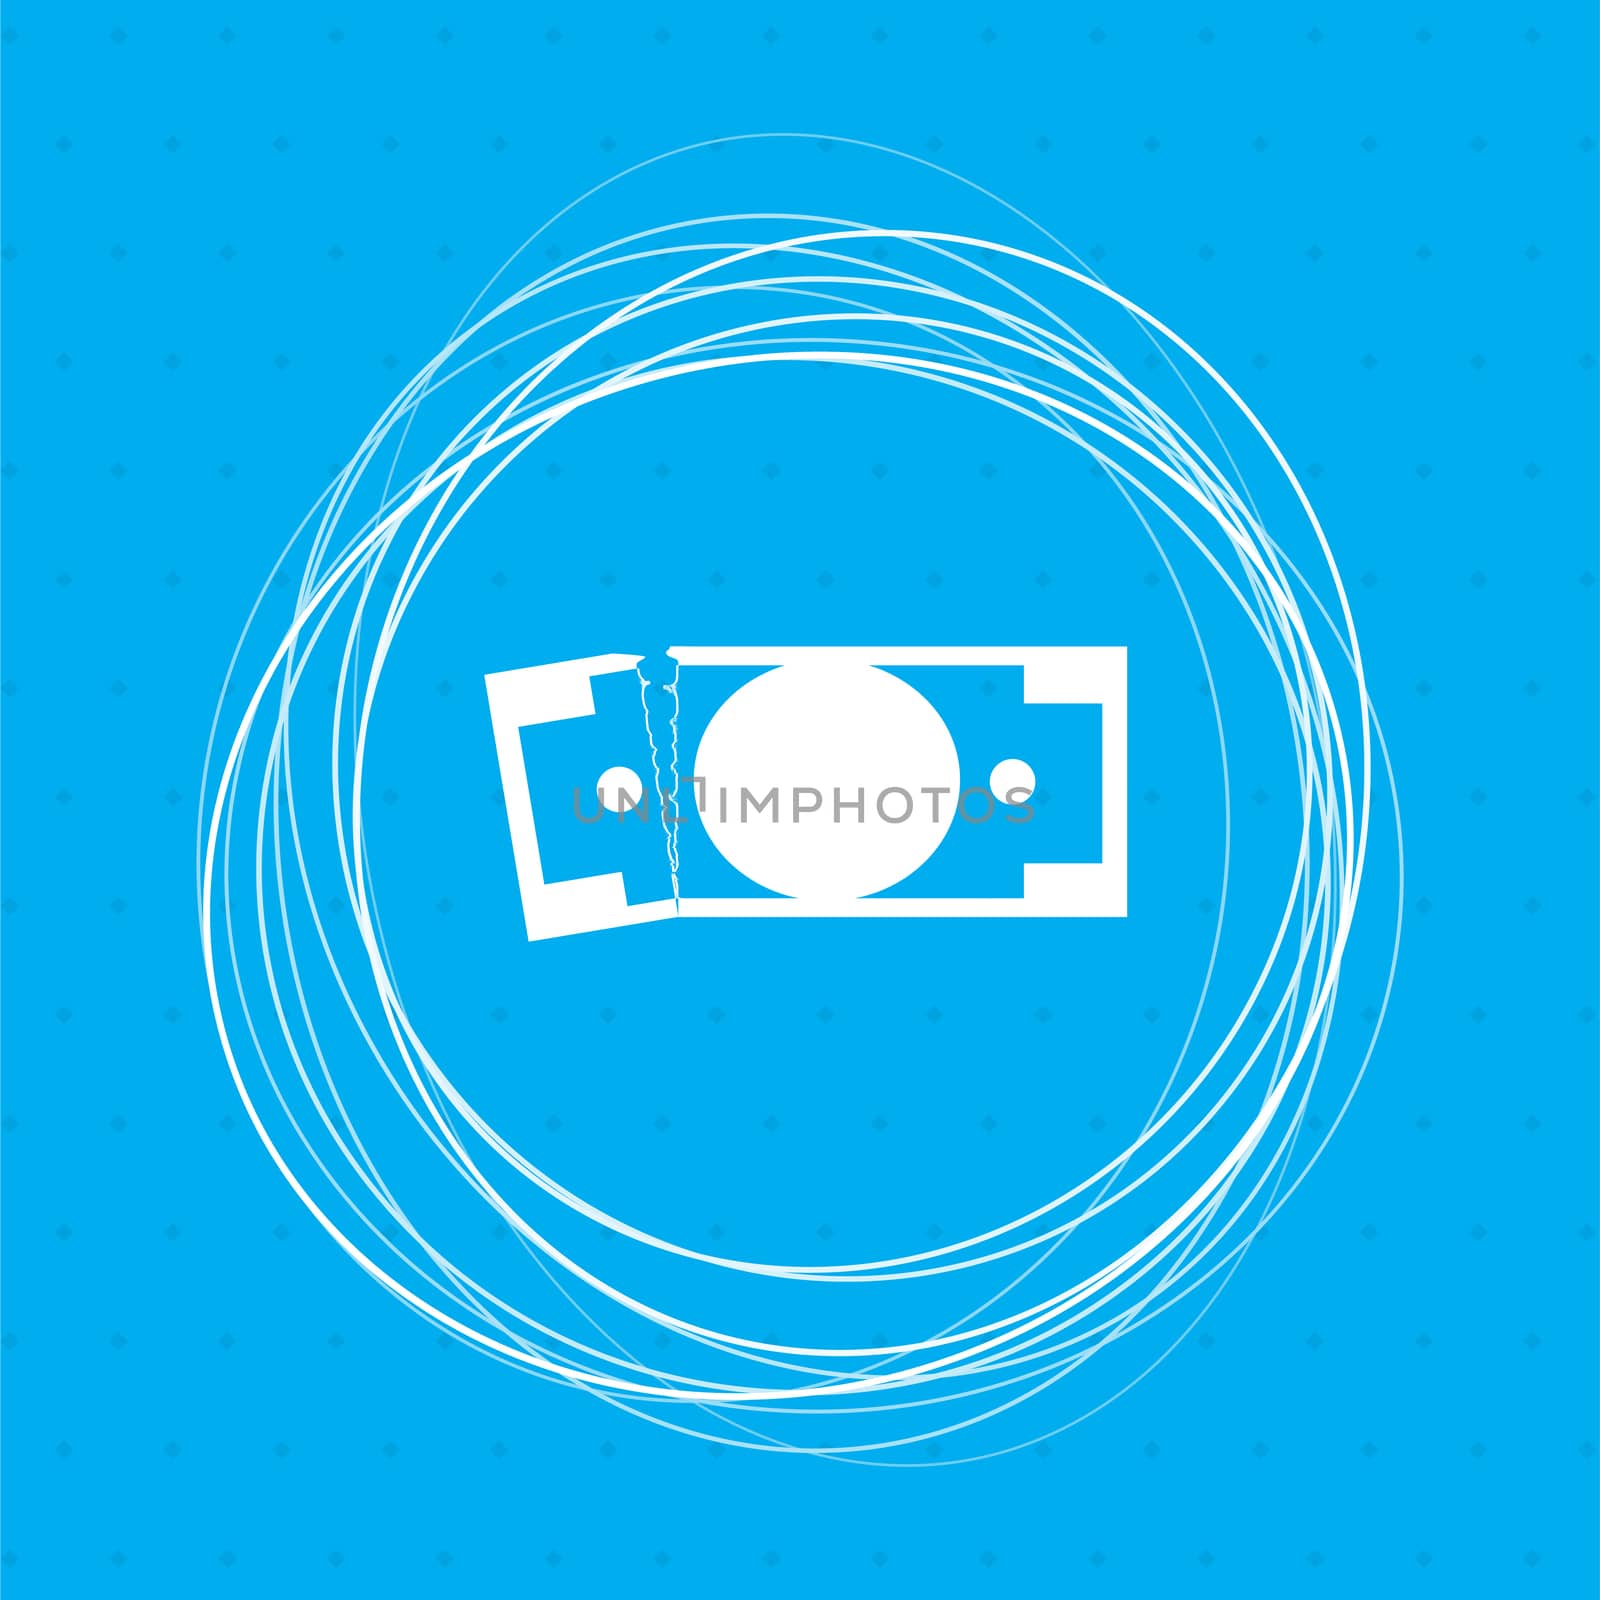 dollar icon on a blue background with abstract circles around and place for your text. illustration